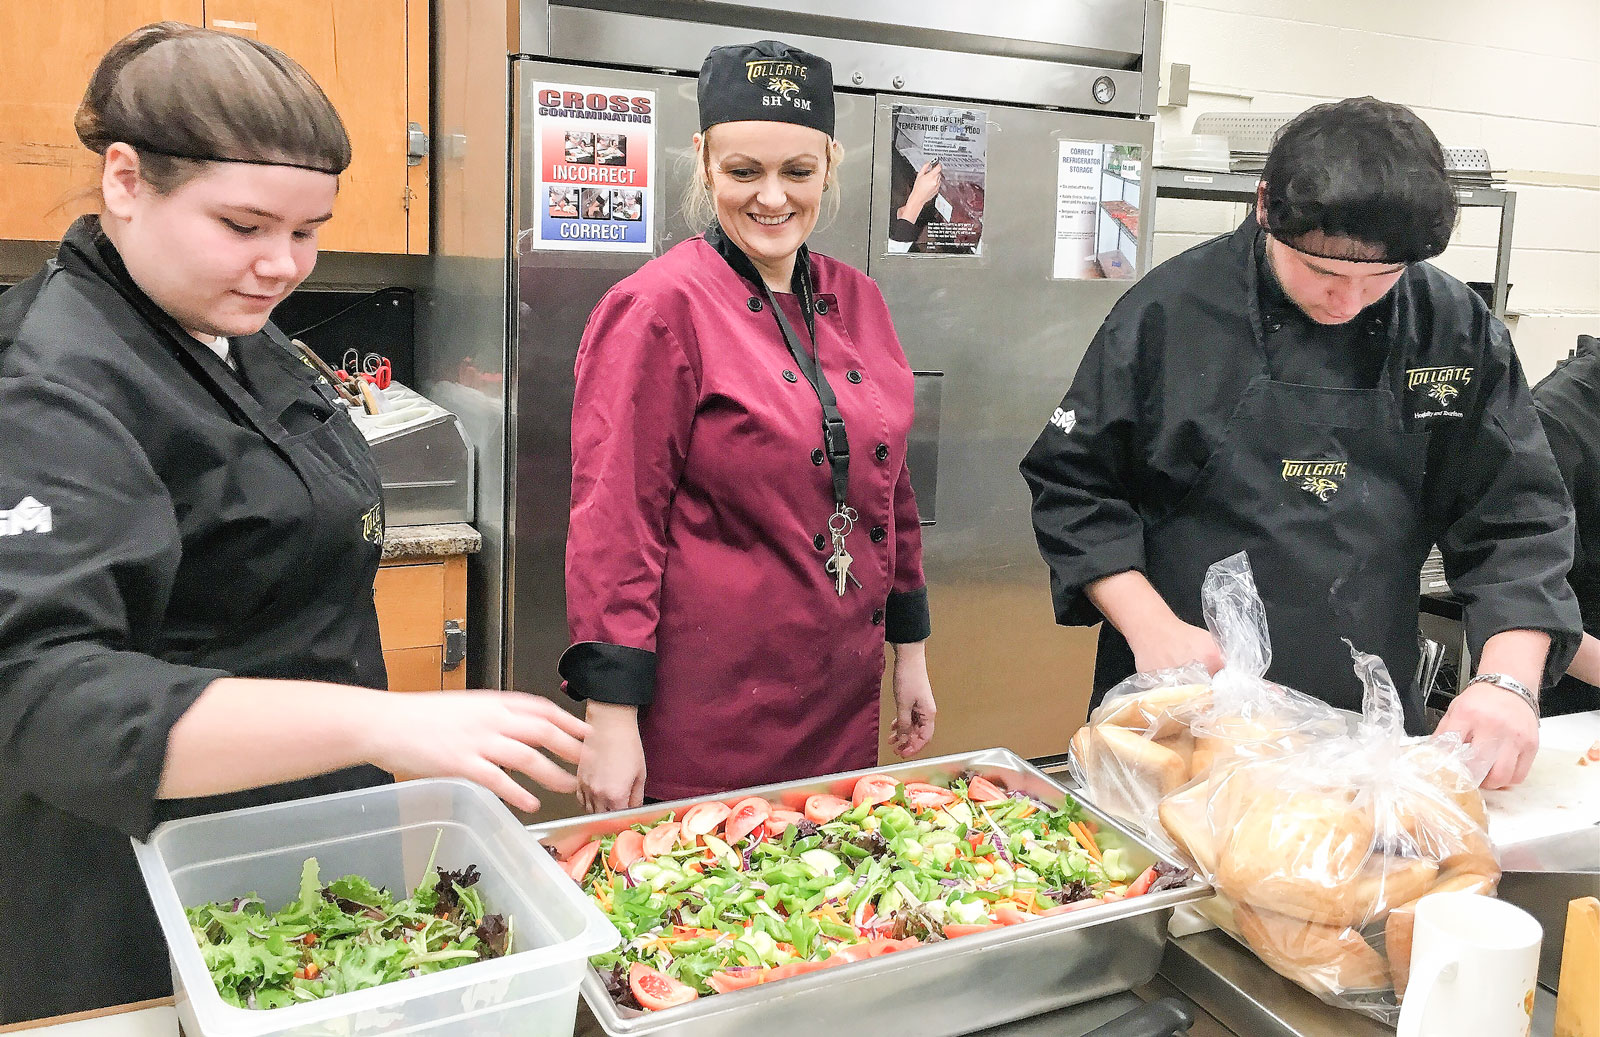 Food Technician Melanie Cattle works with students to prepare salads.